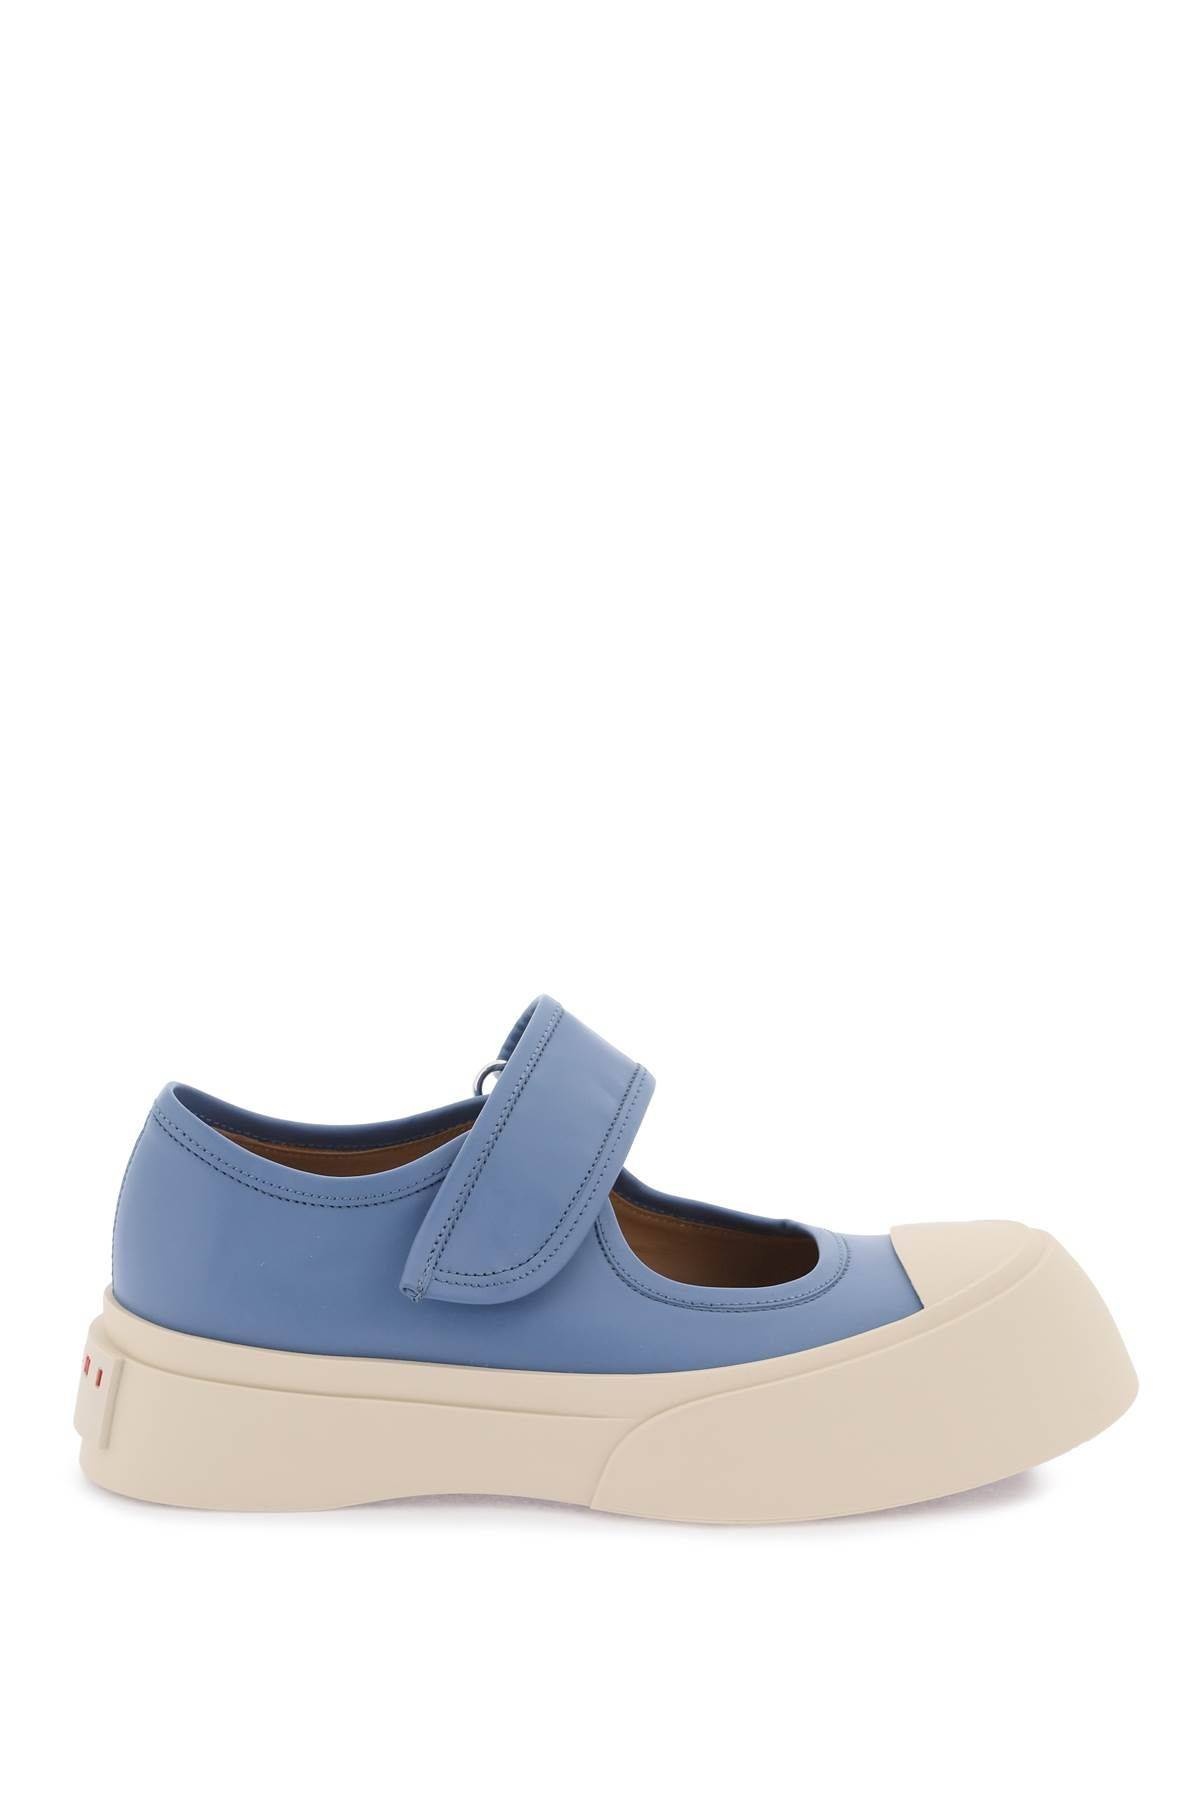 PABLO MARY JANE NAPPA LEATHER SNEAKERS - 1